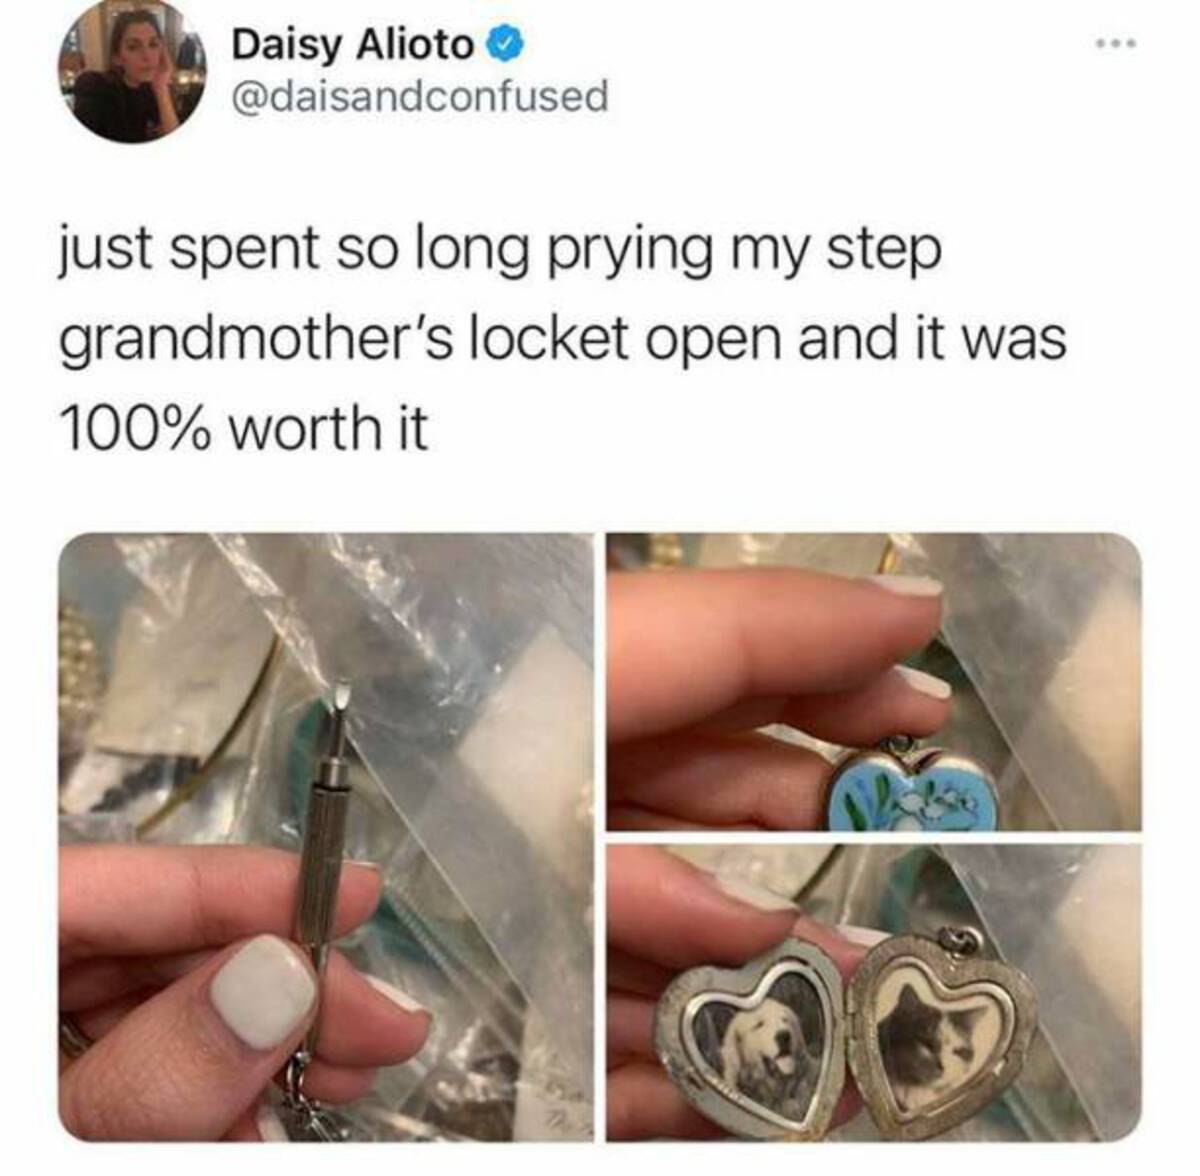 locket meme - Daisy Alioto just spent so long prying my step grandmother's locket open and it was 100% worth it